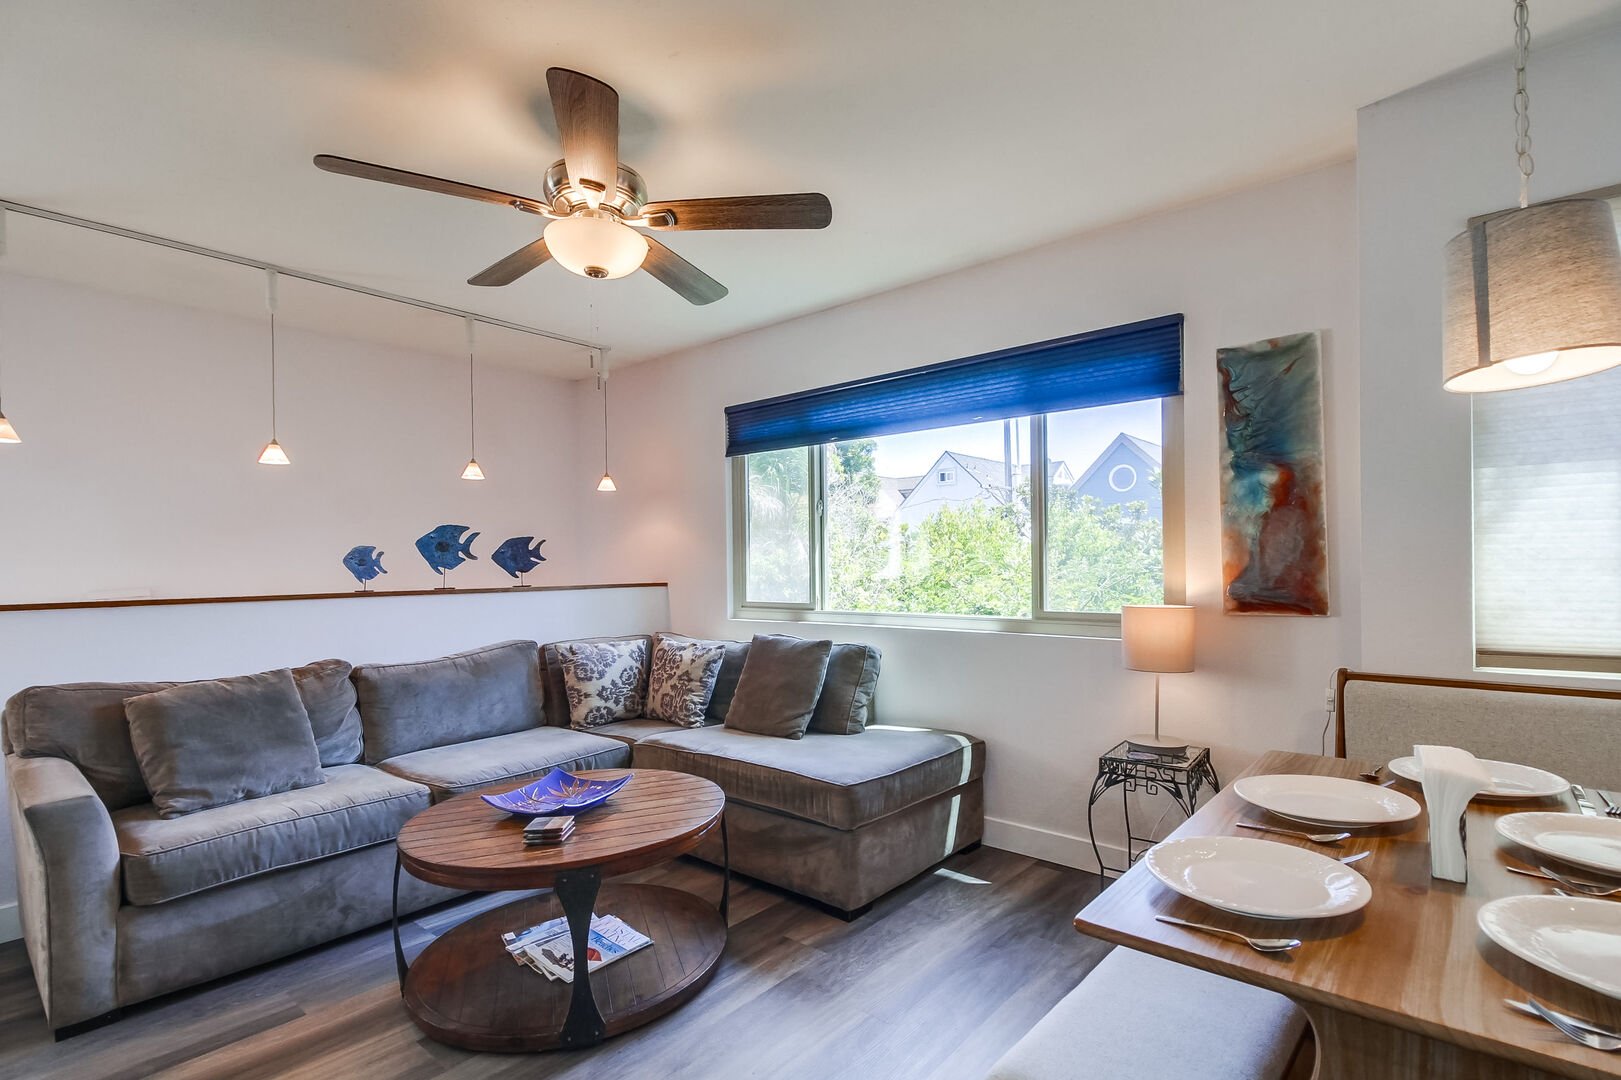 Ascend up a short flight of stairs to the living room with recessed lighting, ceiling fan, TV and queen sofa bed. Open living space with lots of natural light